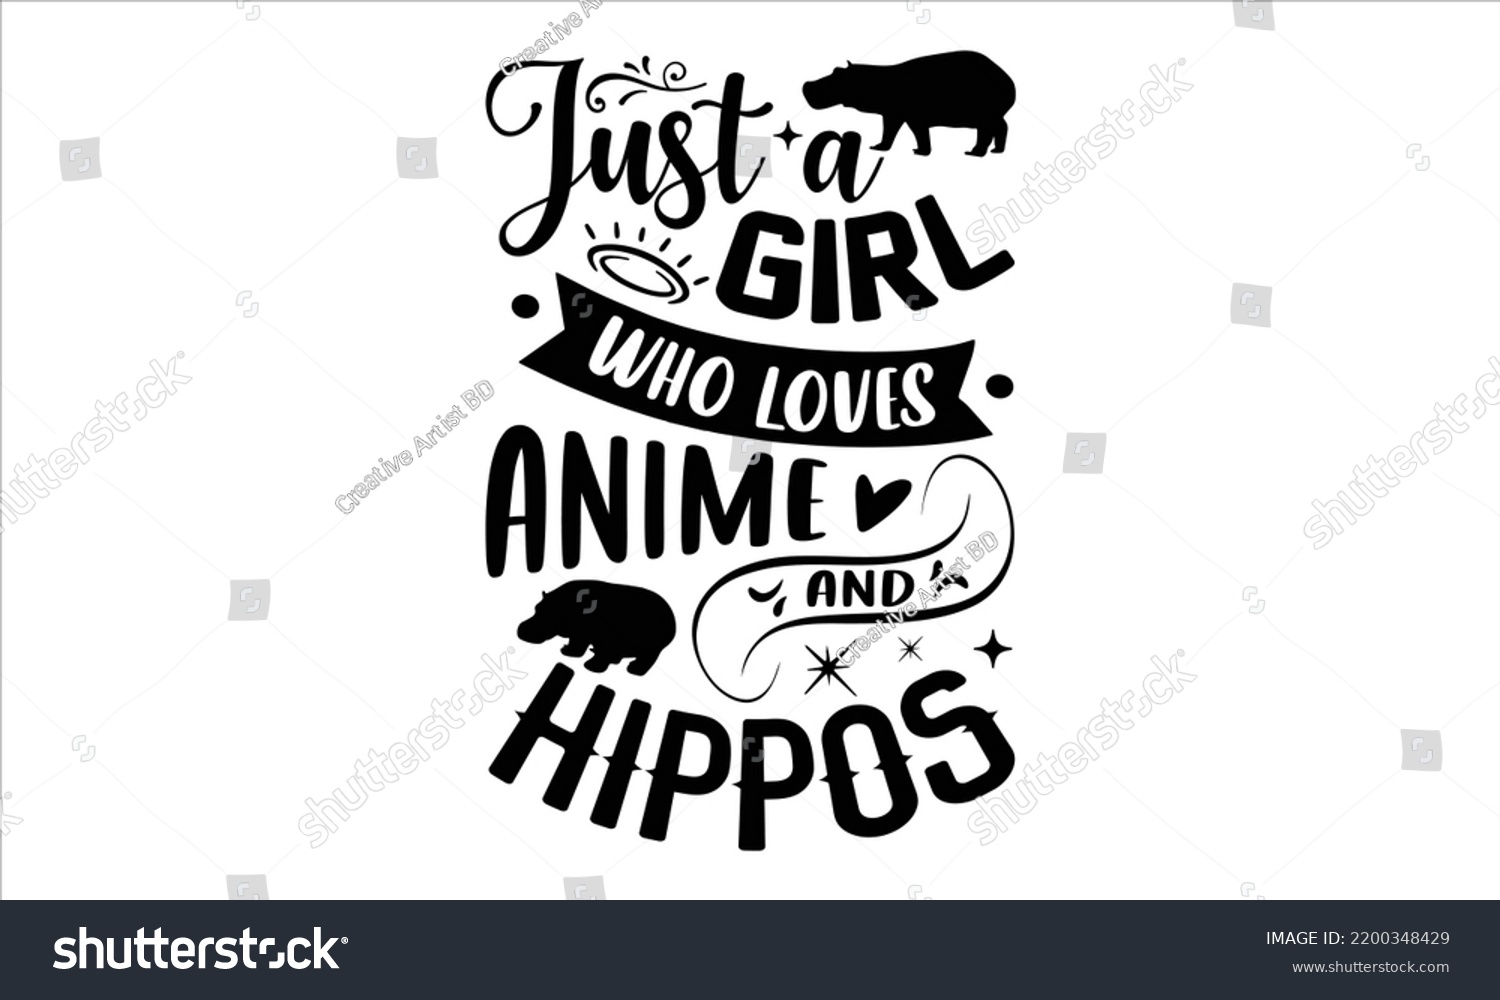 SVG of Just A Girl Who Loves Anime And Hippos - Hippo T shirt Design, Hand drawn vintage illustration with hand-lettering and decoration elements, Cut Files for Cricut Svg, Digital Download svg